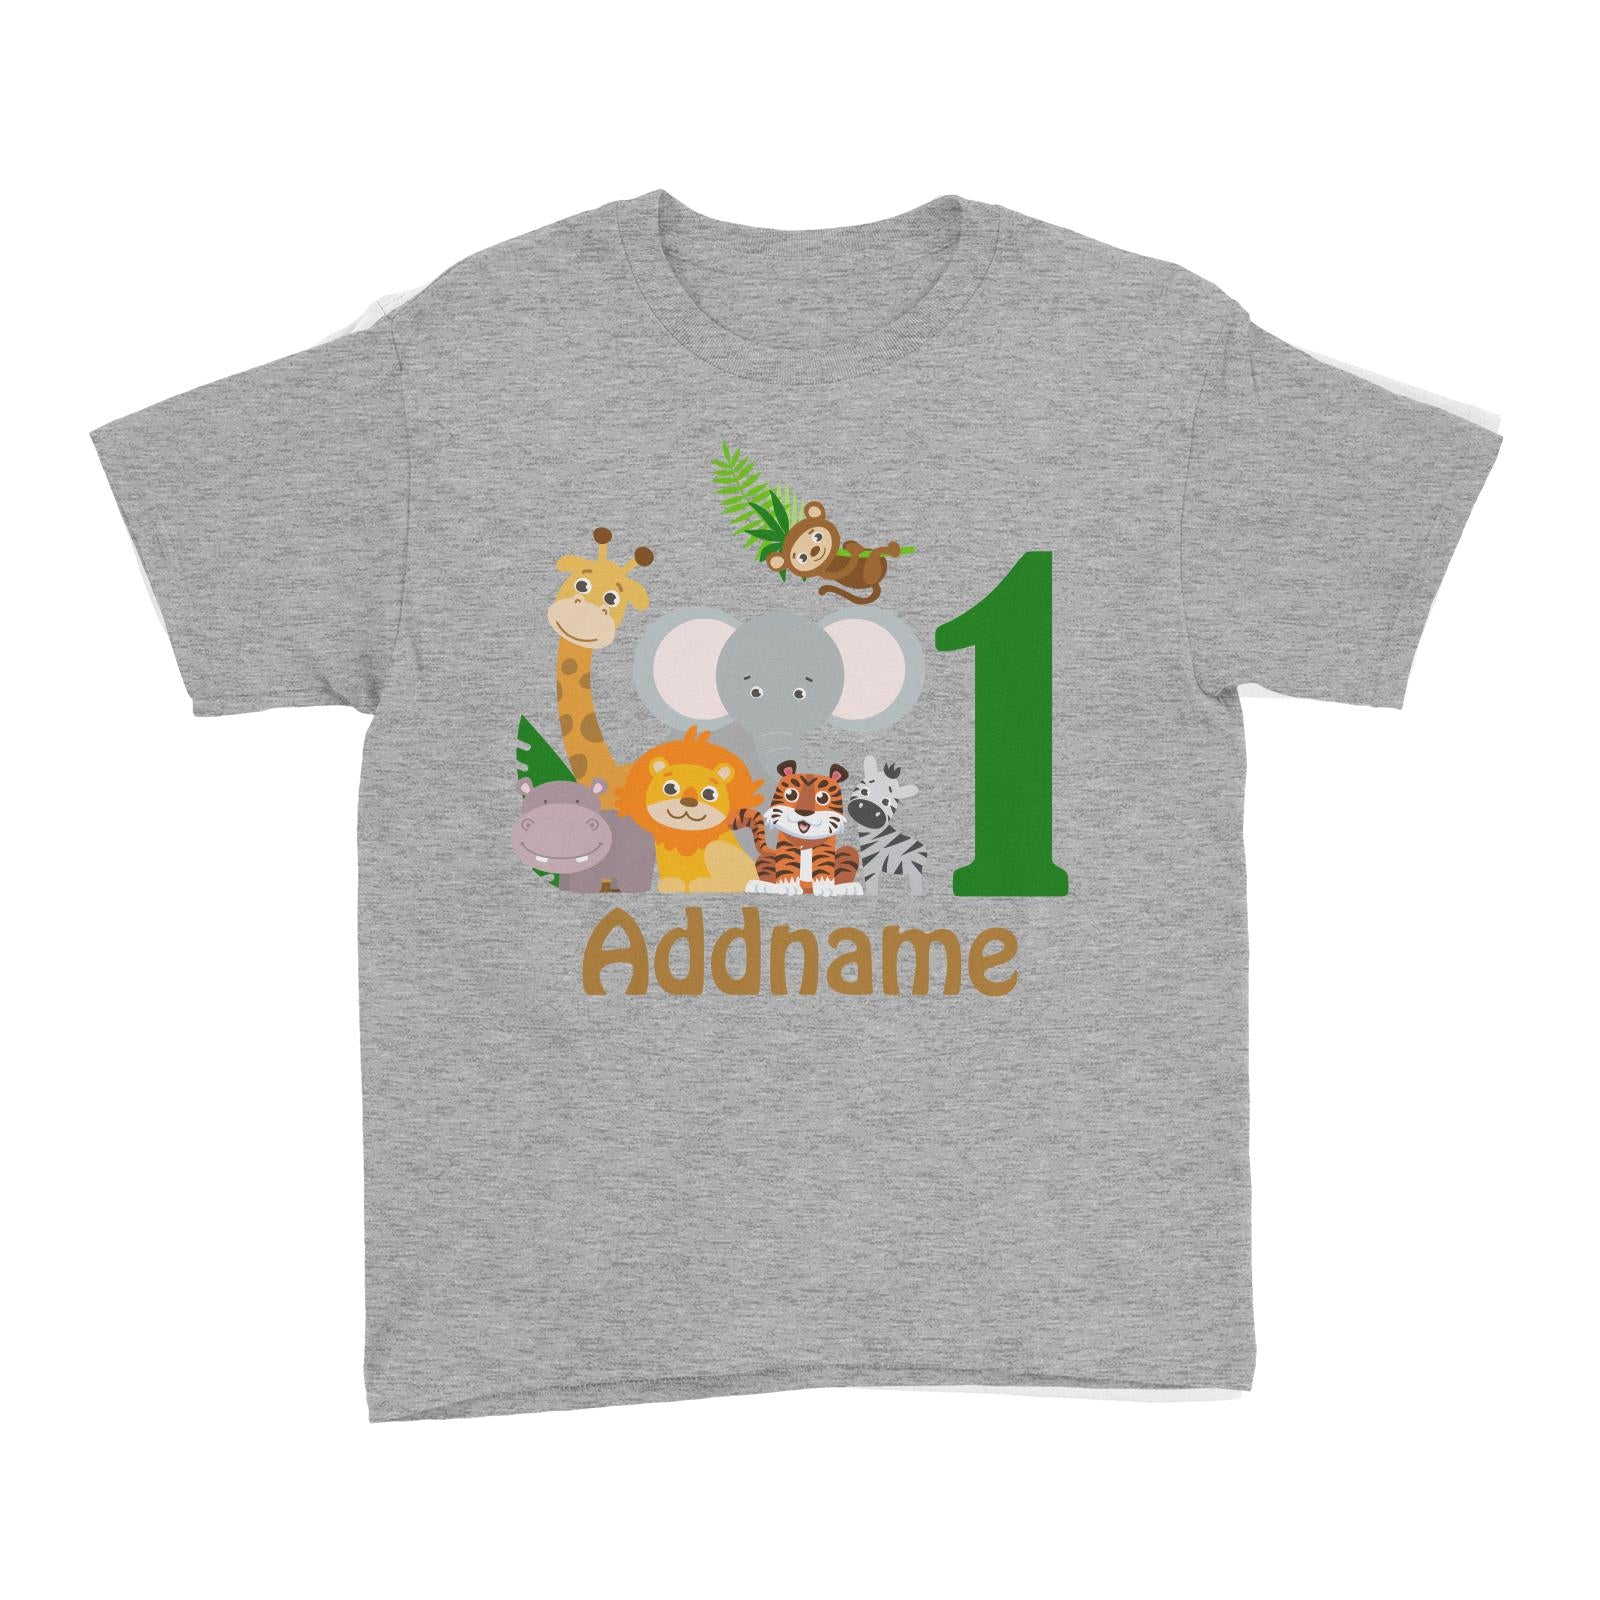 Animal Safari Jungle Birthday Theme Personalizable with Name and Number Kid's T-Shirt